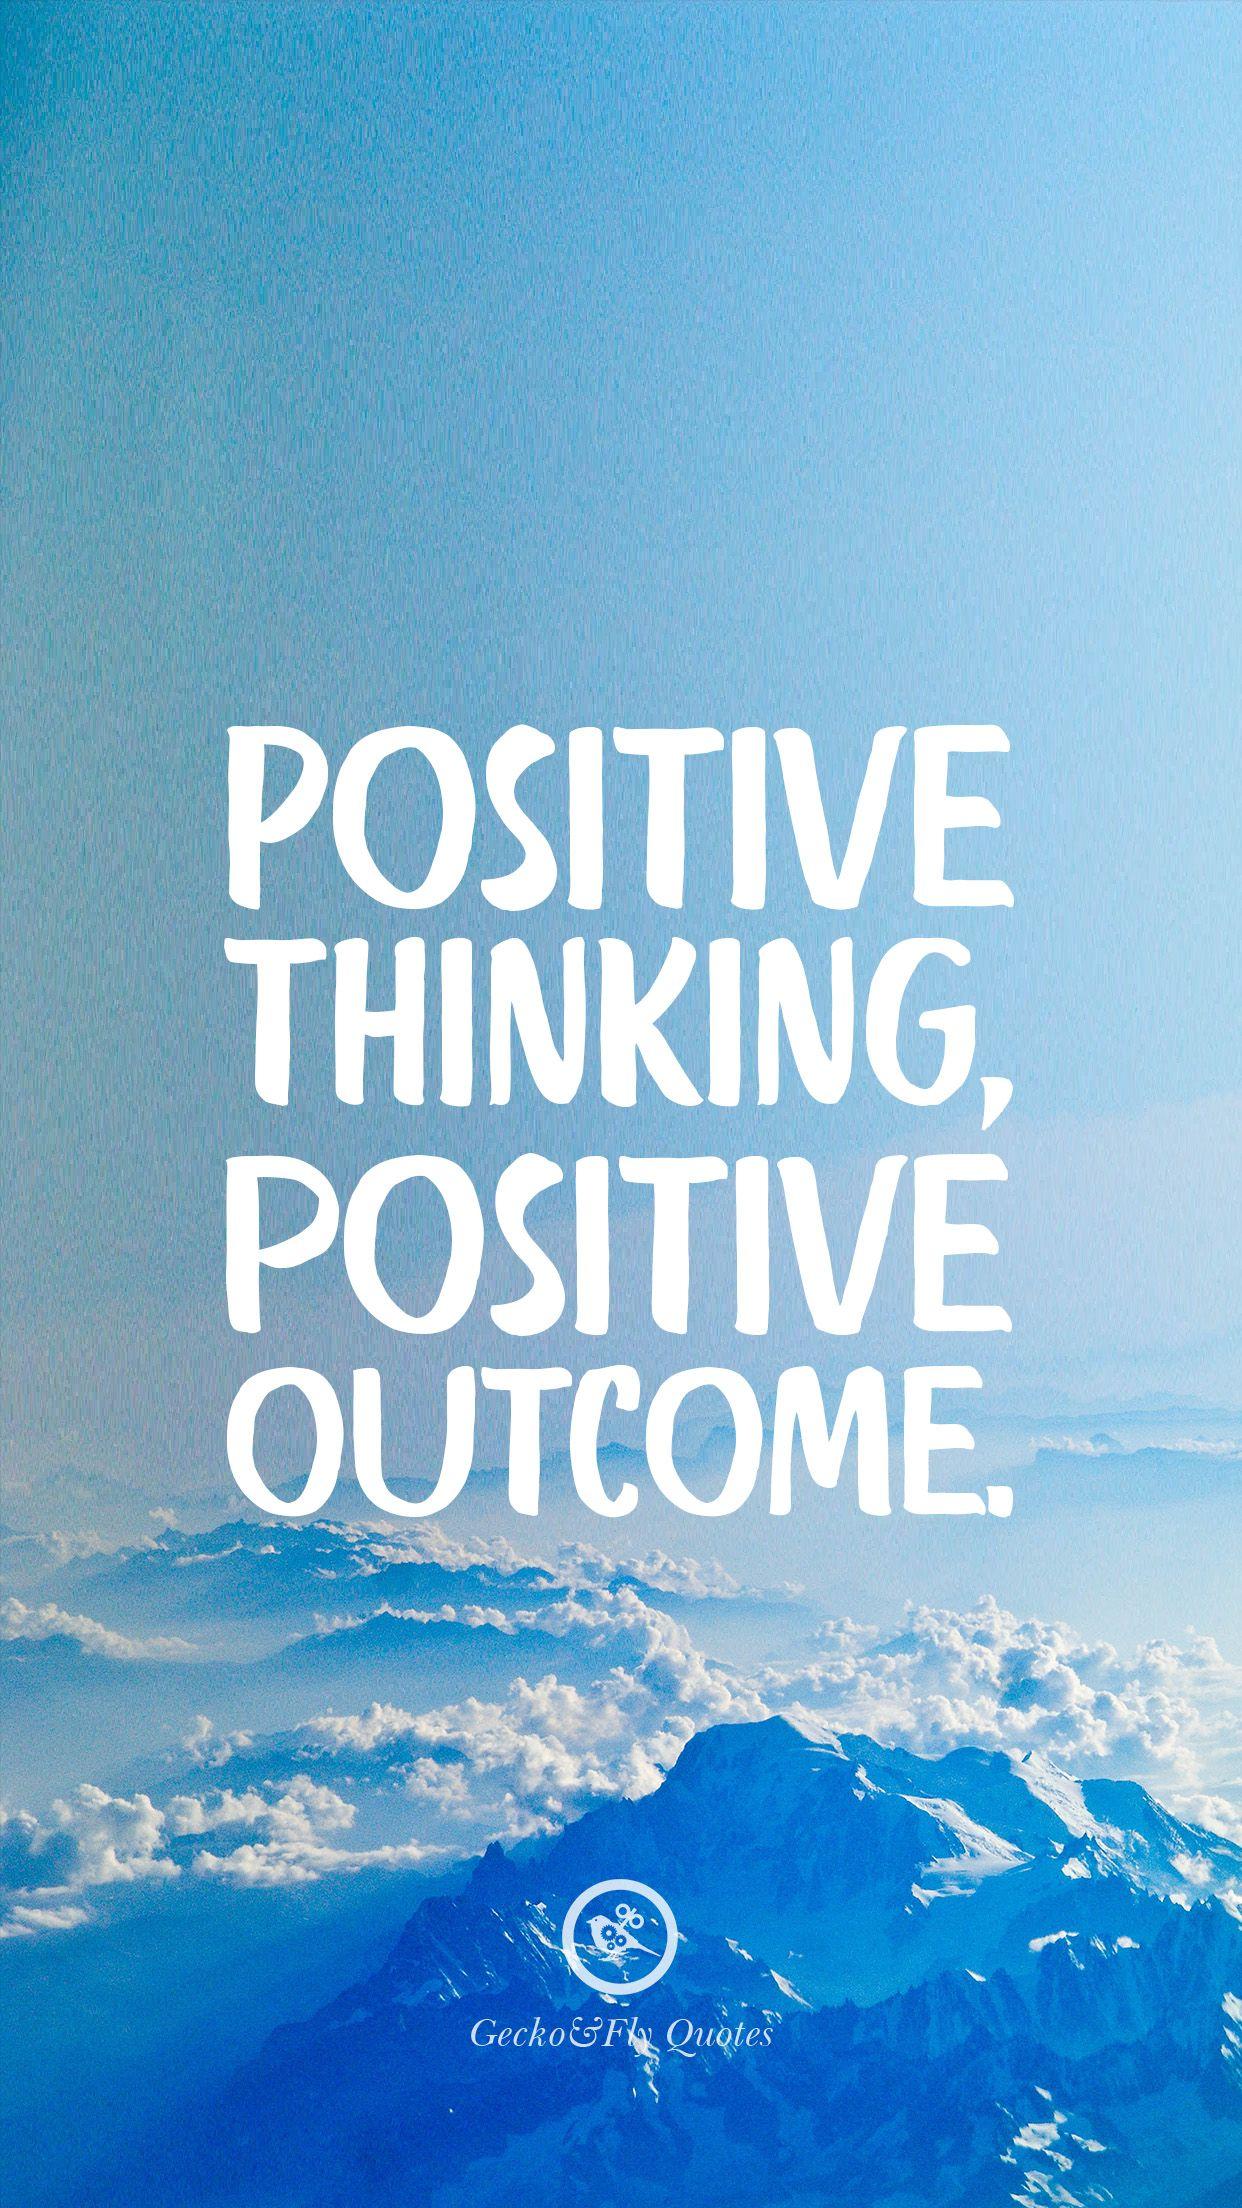 Positive thinking, positive outcome. HD wallpaper quotes, iPhone wallpaper quotes inspirational, Positive wallpaper